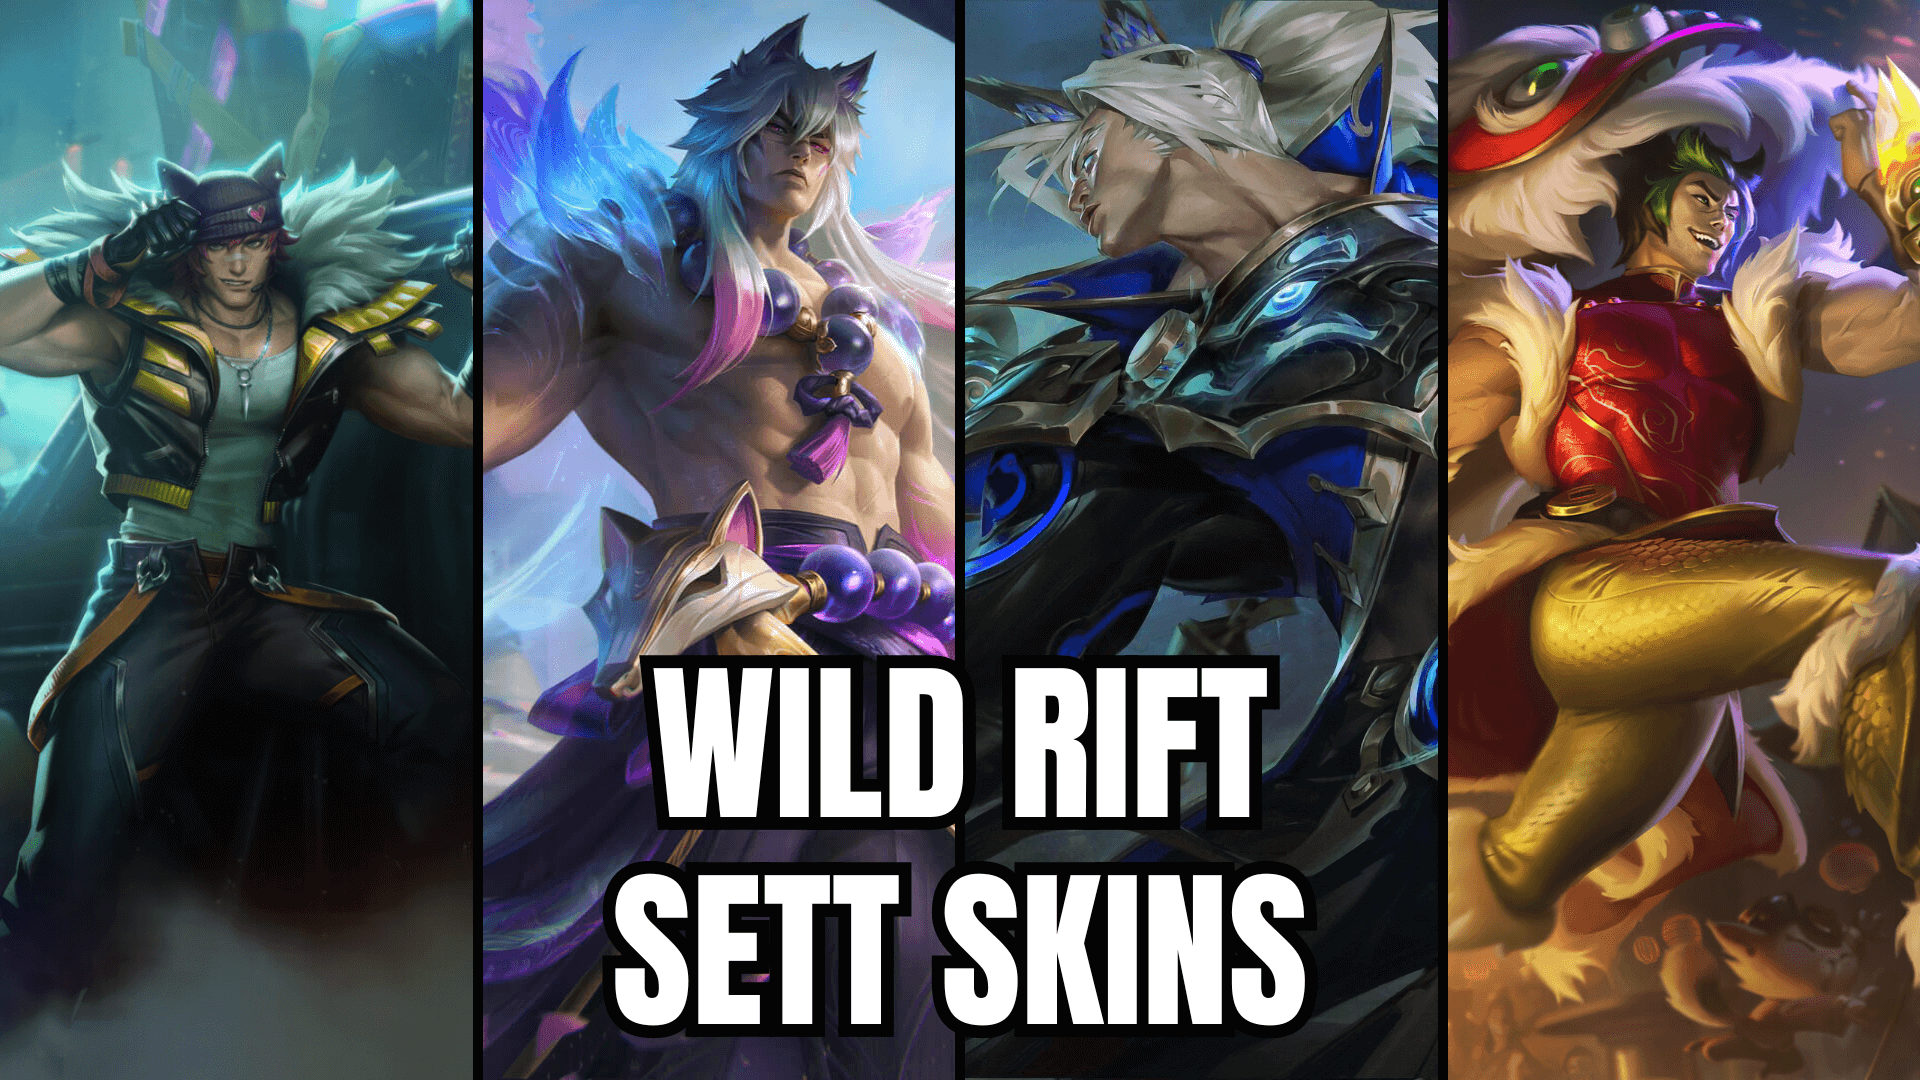 List Of All Sett Skins in Wild Rift: From Worst to The Best.